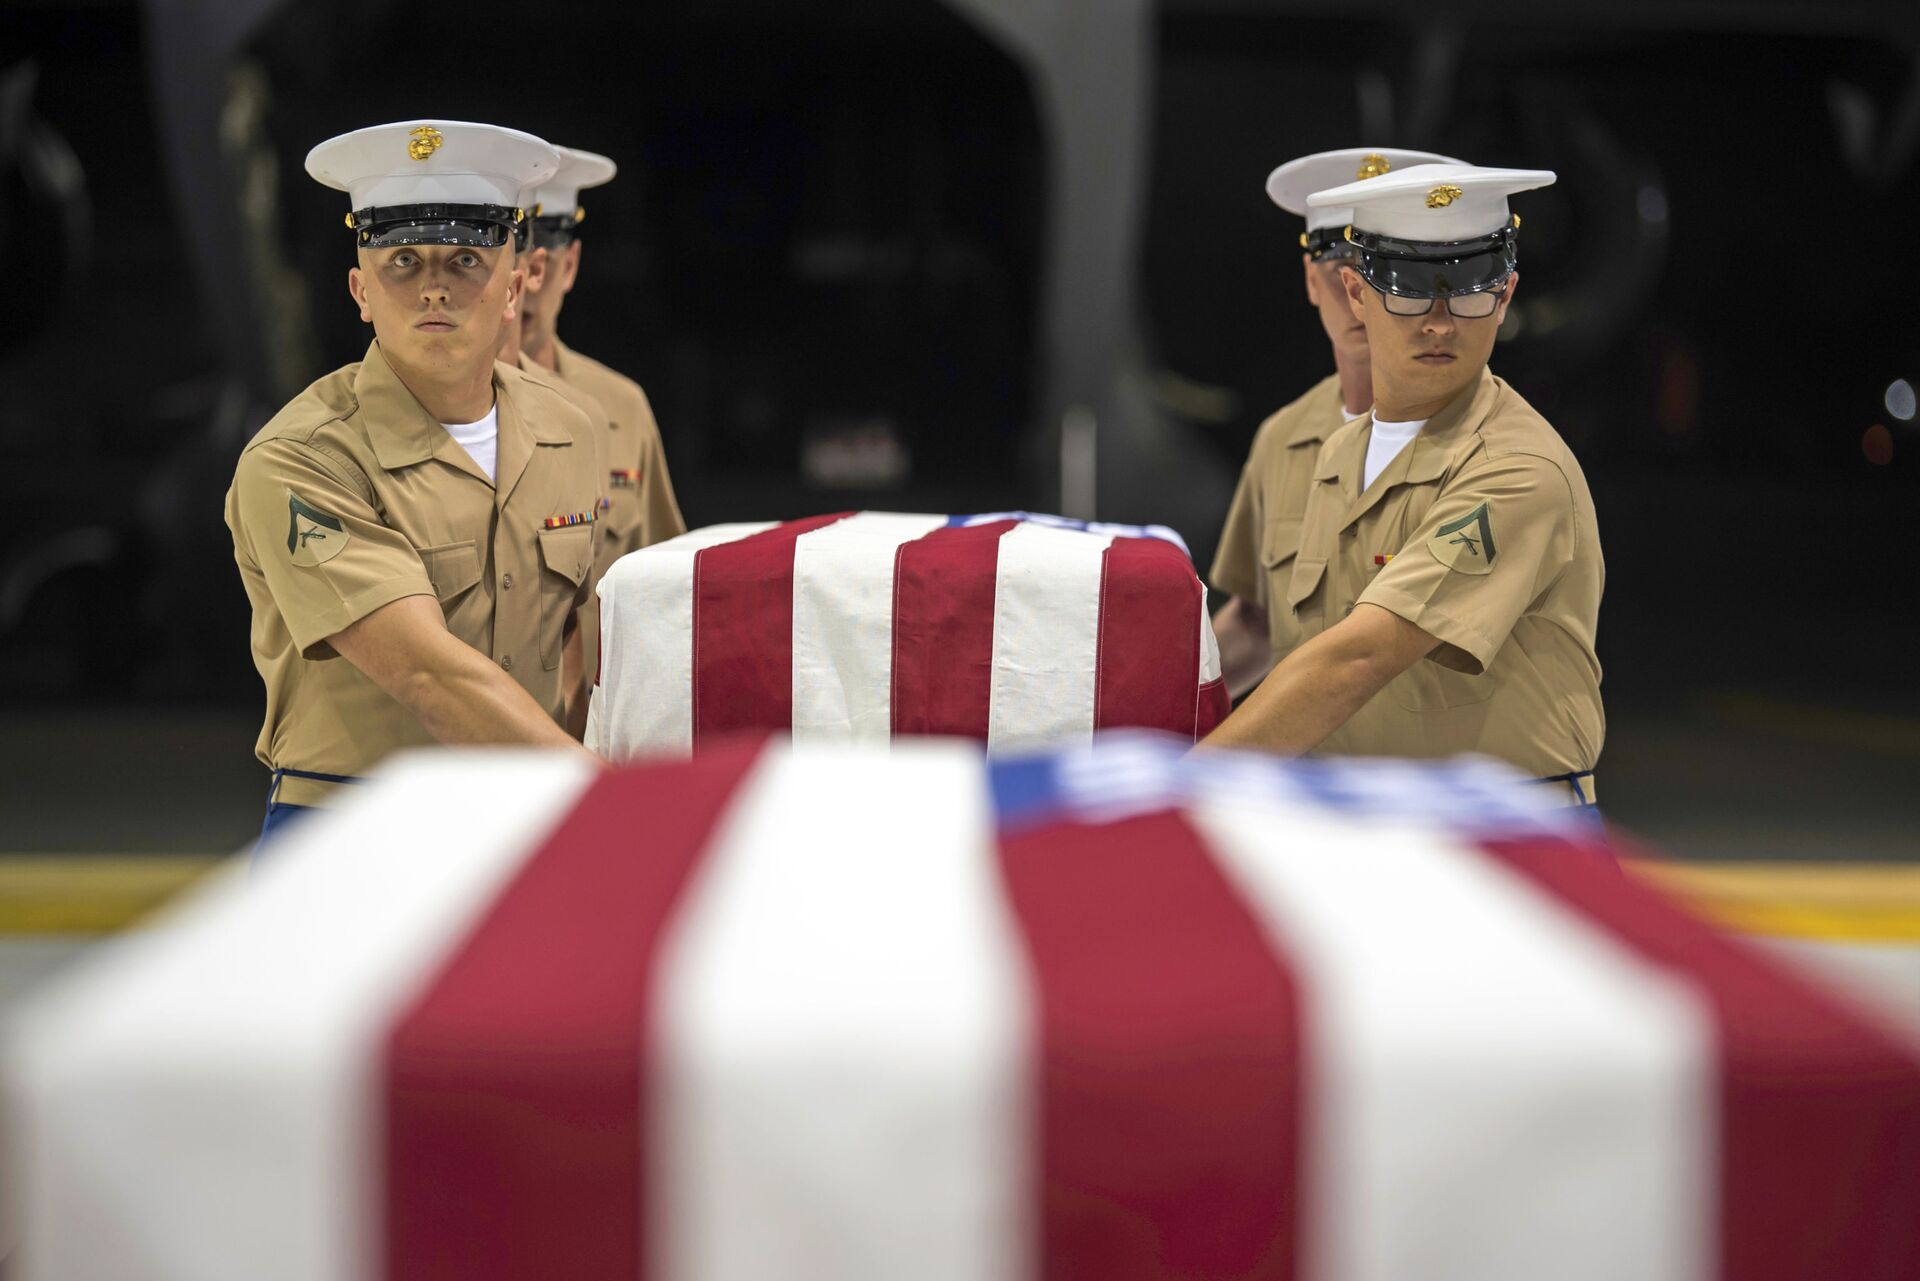 In this Wednesday, July 17, 2019 photo, US Marines carry transfer cases holding the possible remains of unidentified service members lost in the Battle of Tarawa during World War II, during what is known as an honorable carry conducted by the Defense POW/MIA Accounting Agency (DPAA), in a hangar at Joint Base Pearl Harbor-Hickam in Hawaii. - Sputnik International, 1920, 24.05.2023